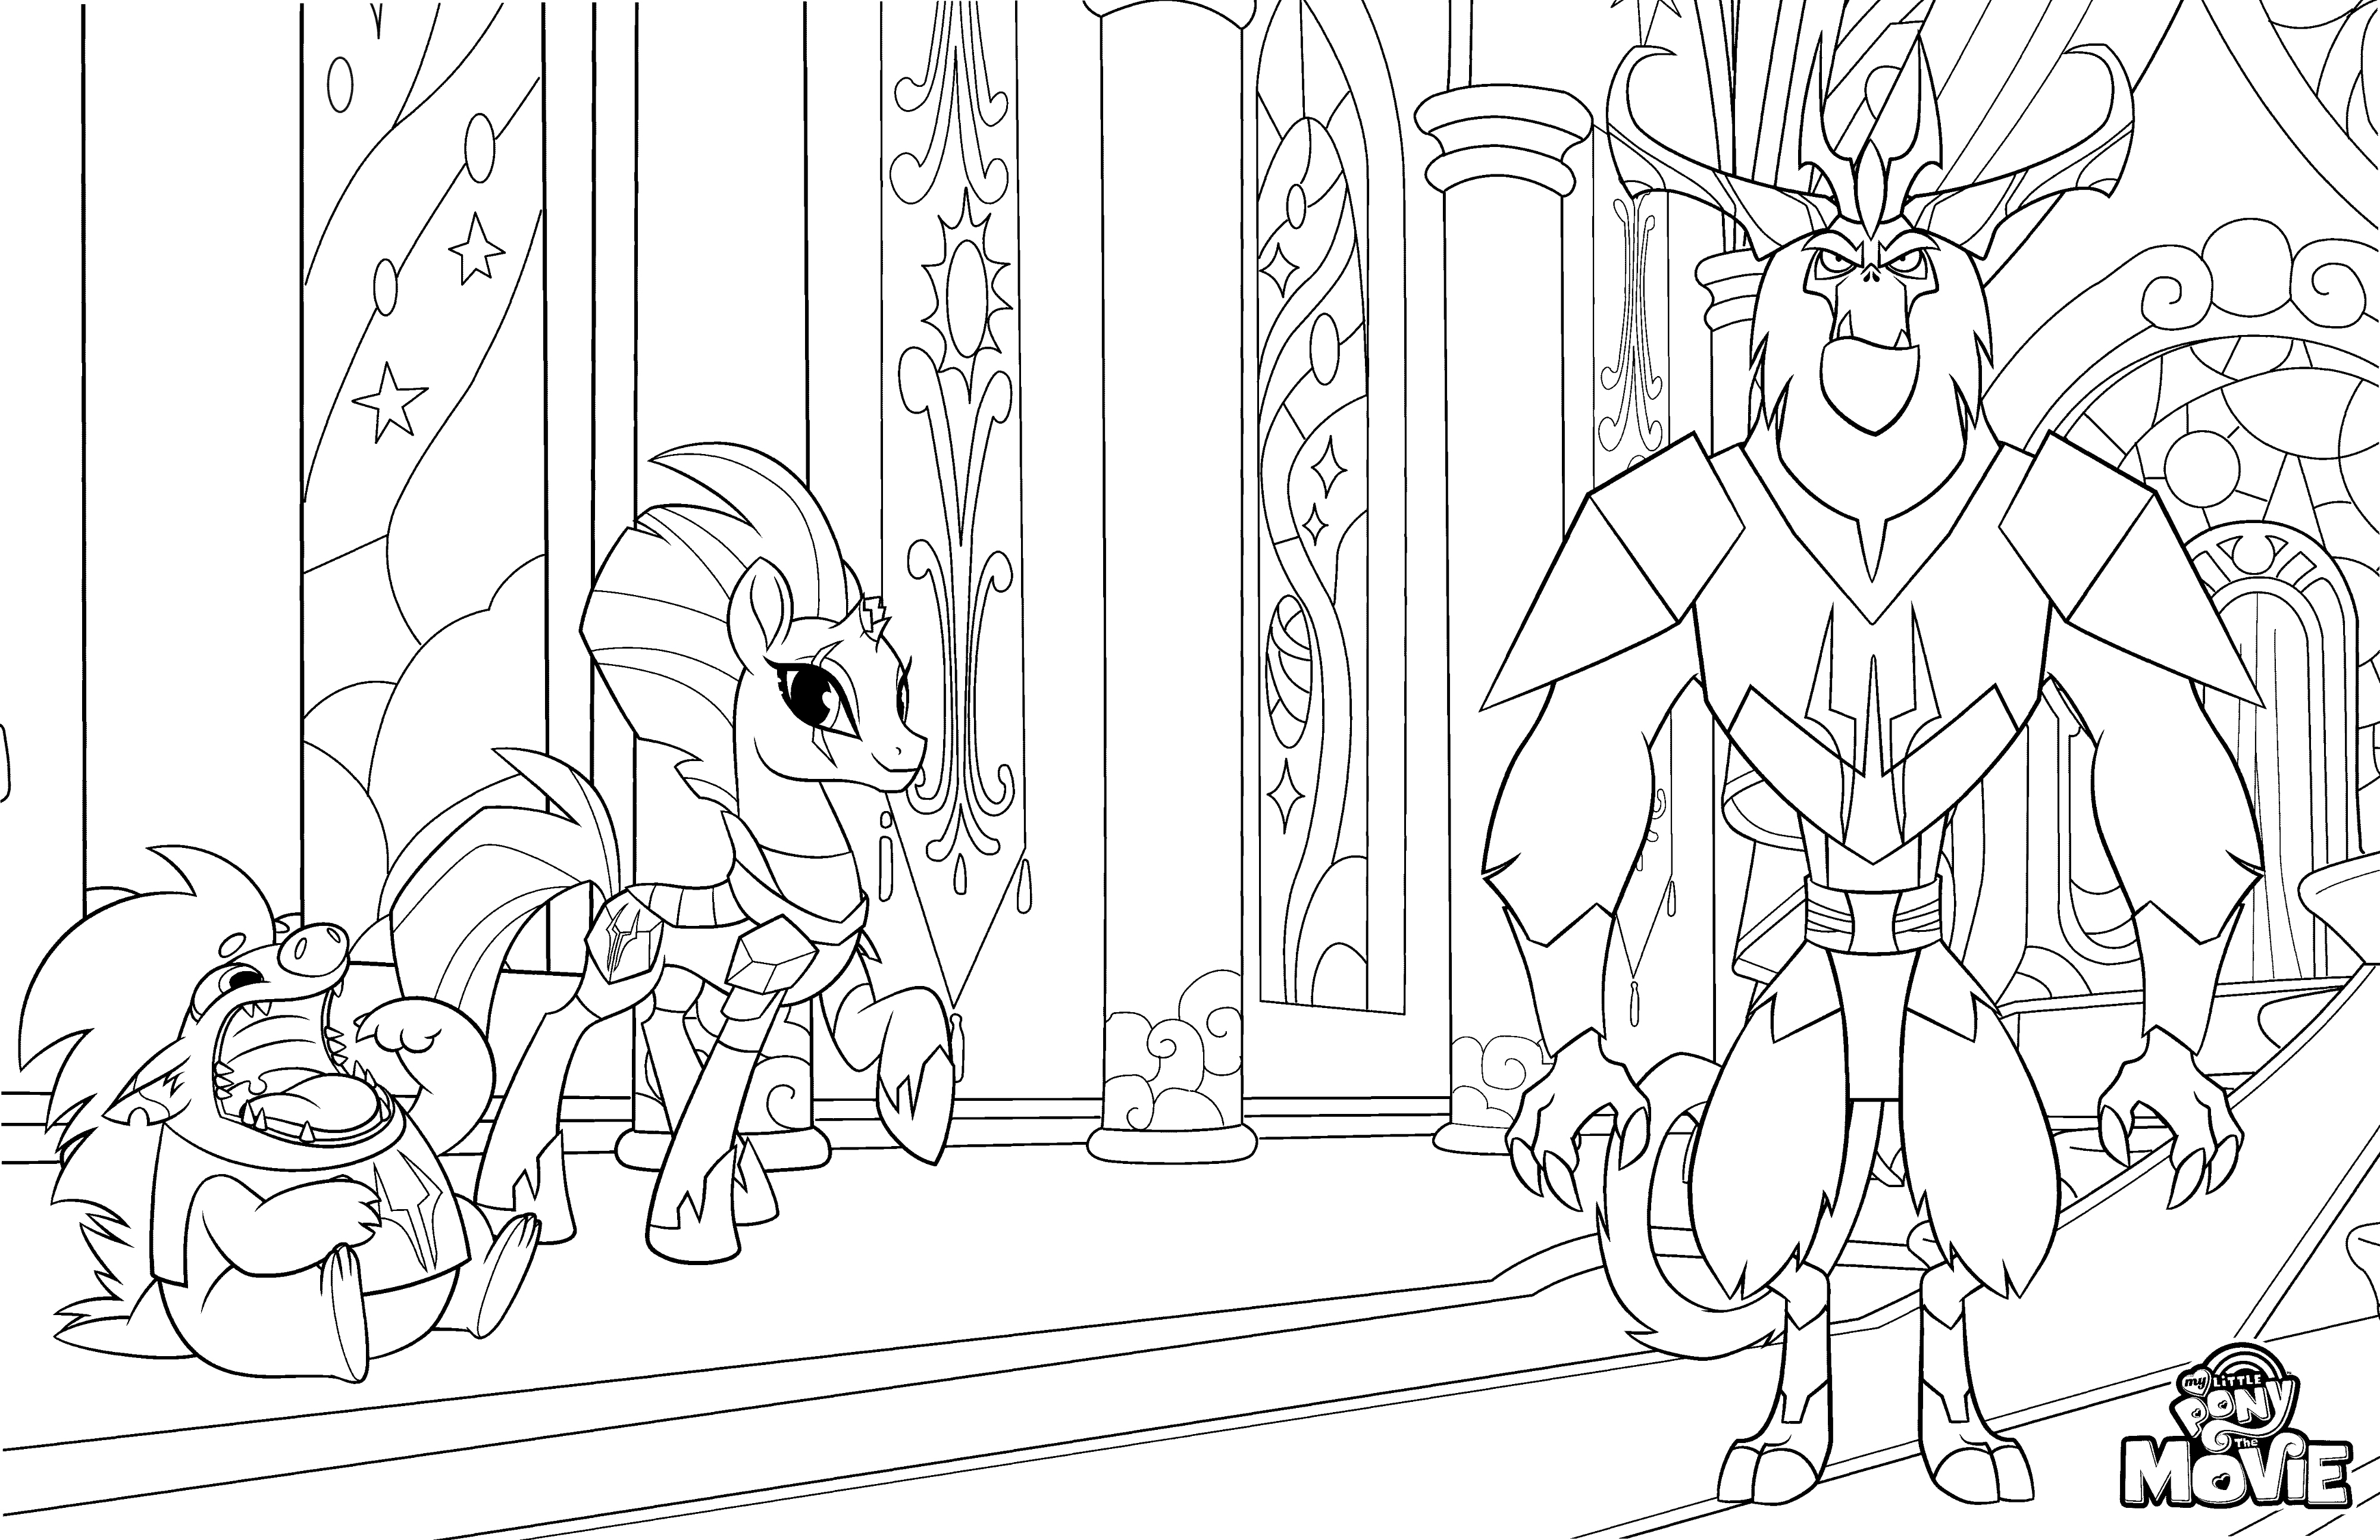 New My Little Pony Movie Coloring Pages - coloringpages2019